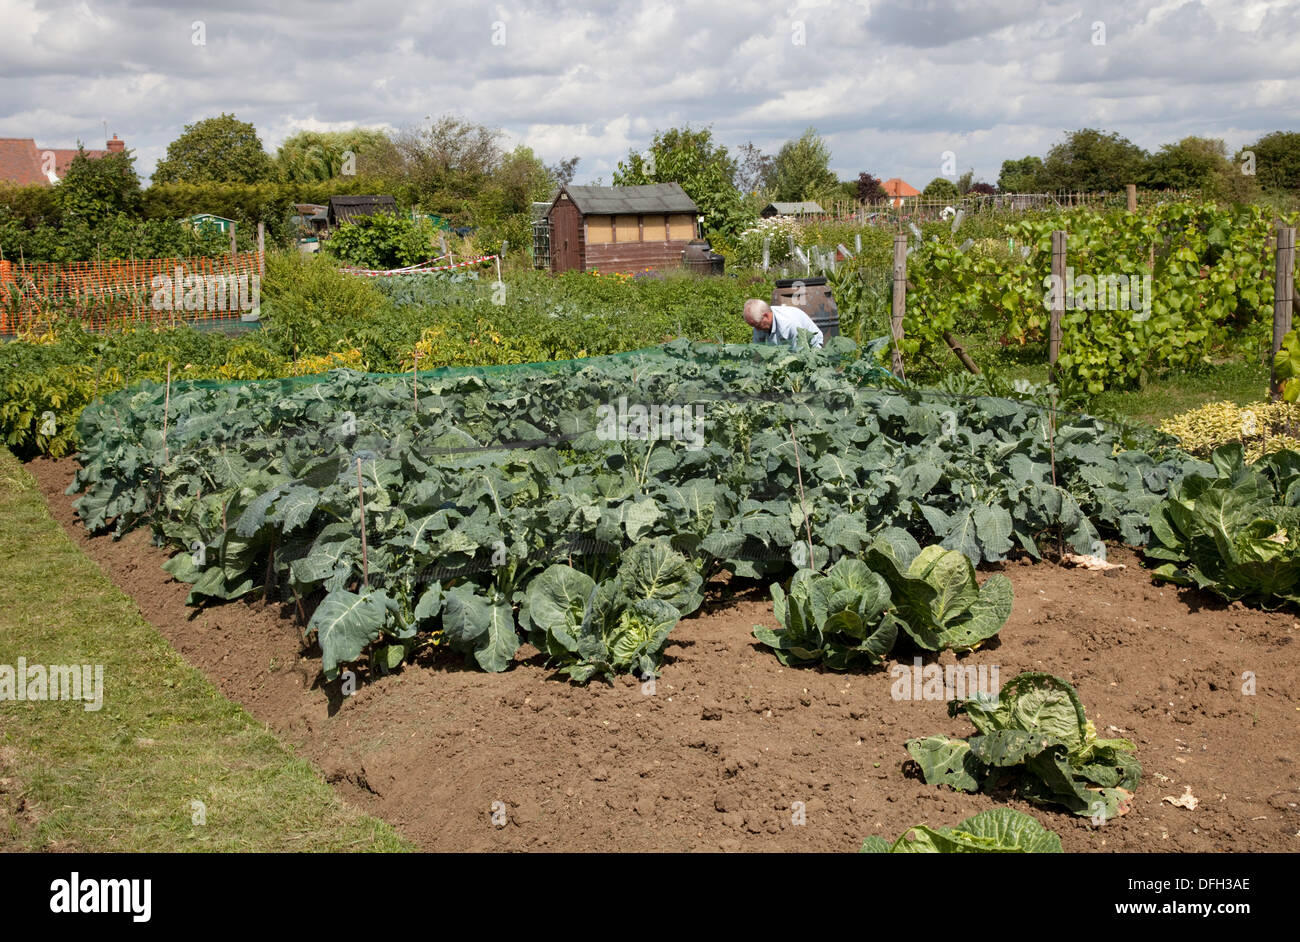 Man tending vegetables on allotment with netting over cabbages Mickleton UK Stock Photo